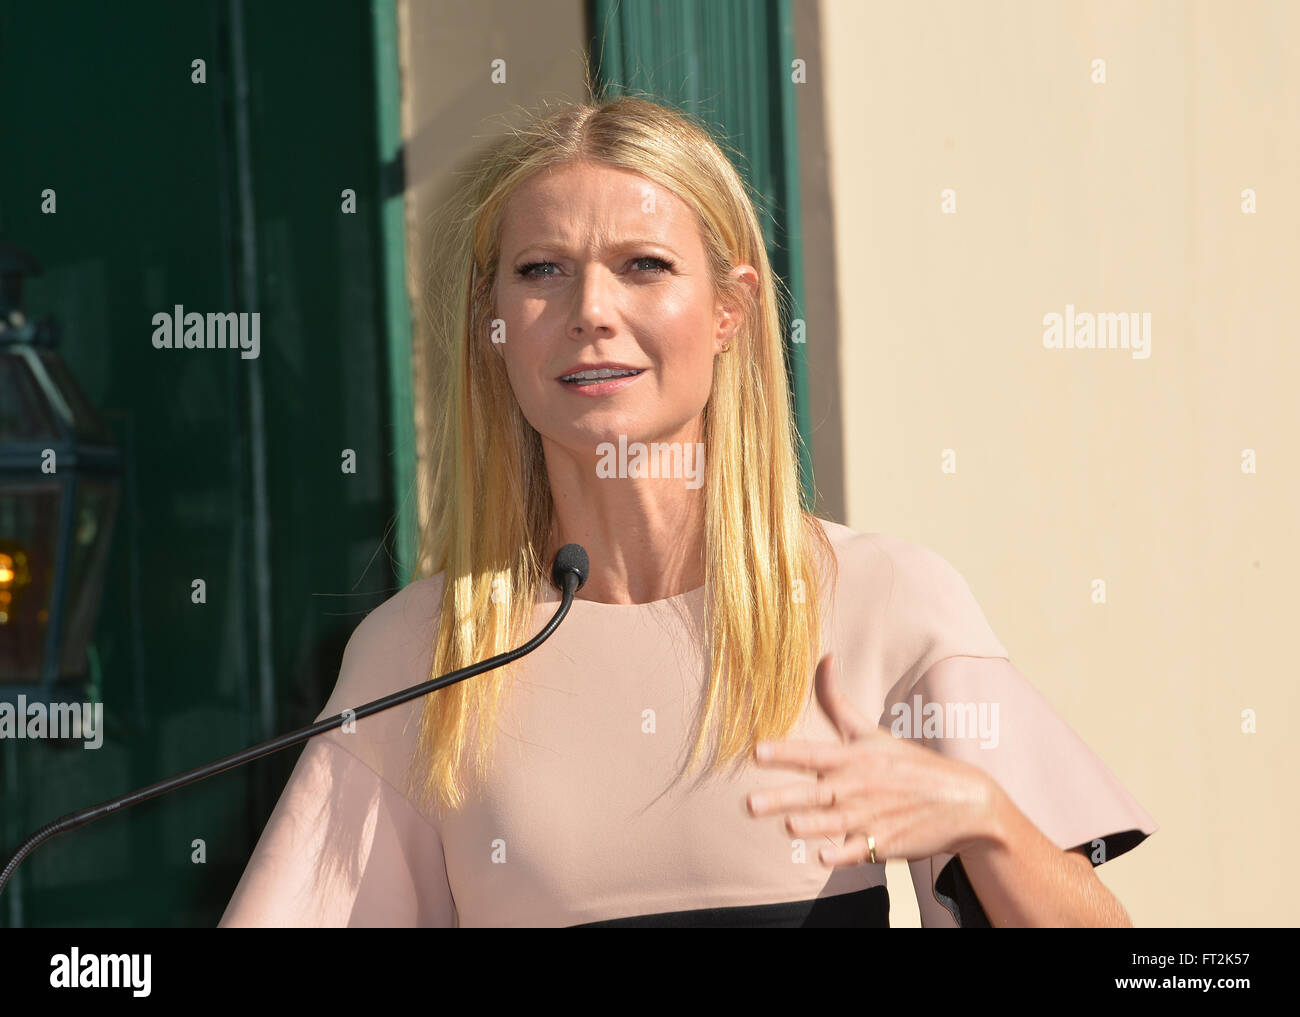 LOS ANGELES, CA - DECEMBER 8, 2015: Actress Gwyneth Paltrow on Hollywood Boulevard where Rob Lowe was honored with the 2,567th star on the Hollywood Walk of Fame. Stock Photo